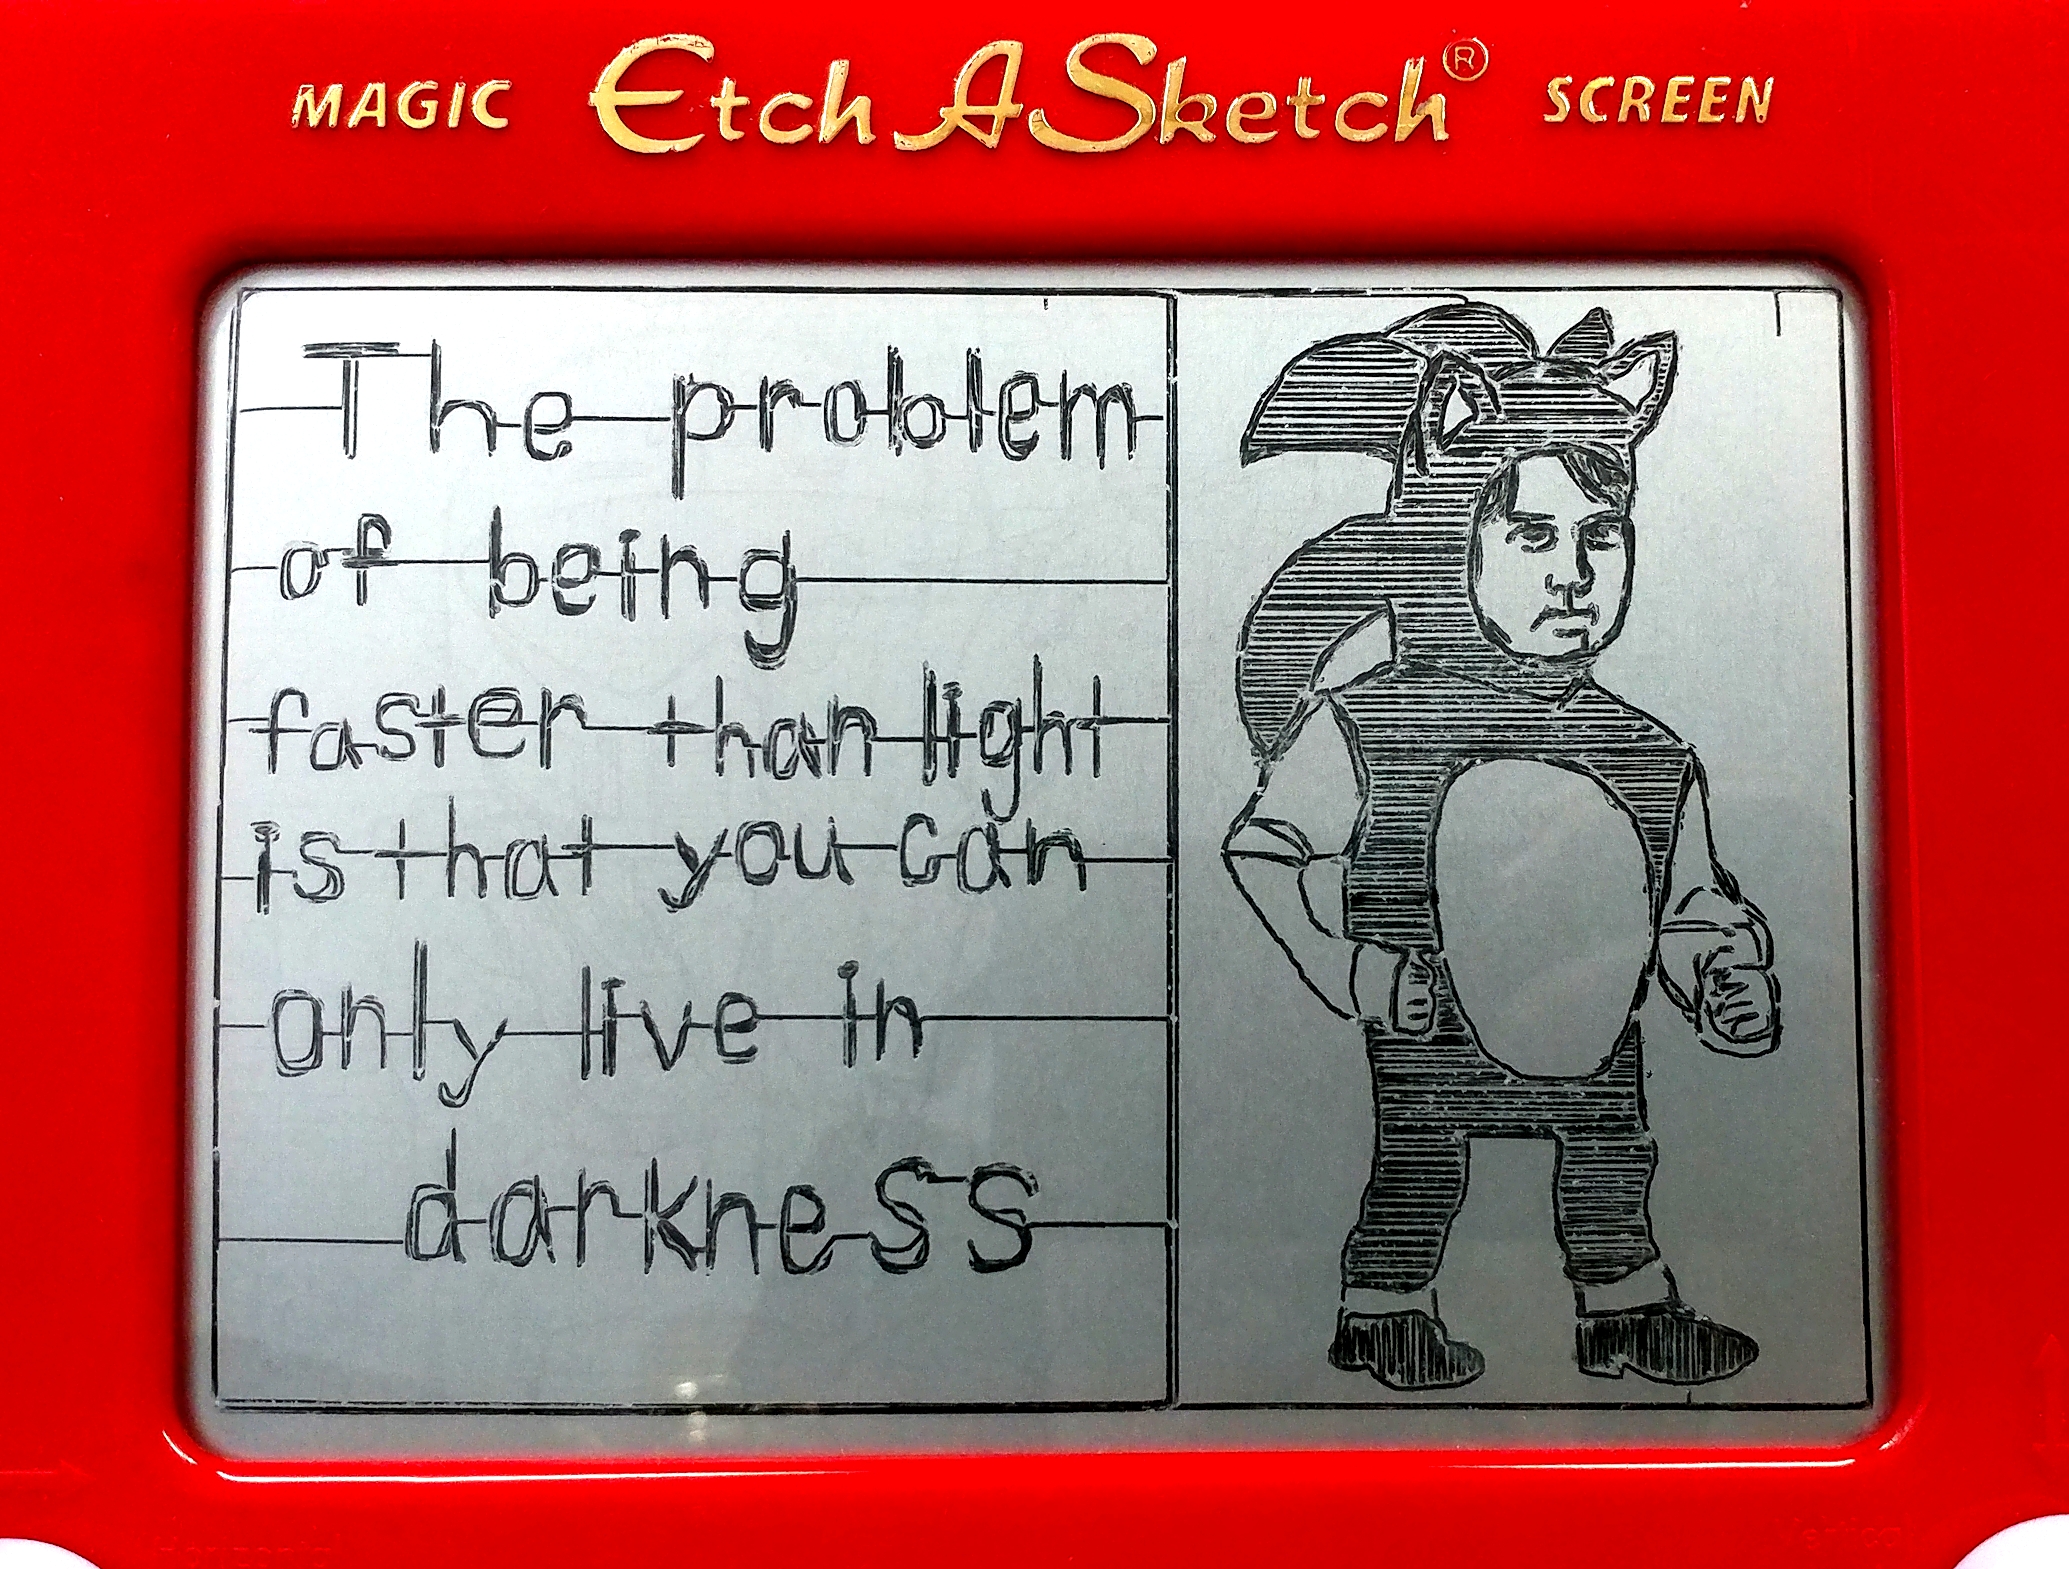 cartoon - Magic Etch A Sketch Screen The problem of being faster than light is that you can Fonty live the darkness